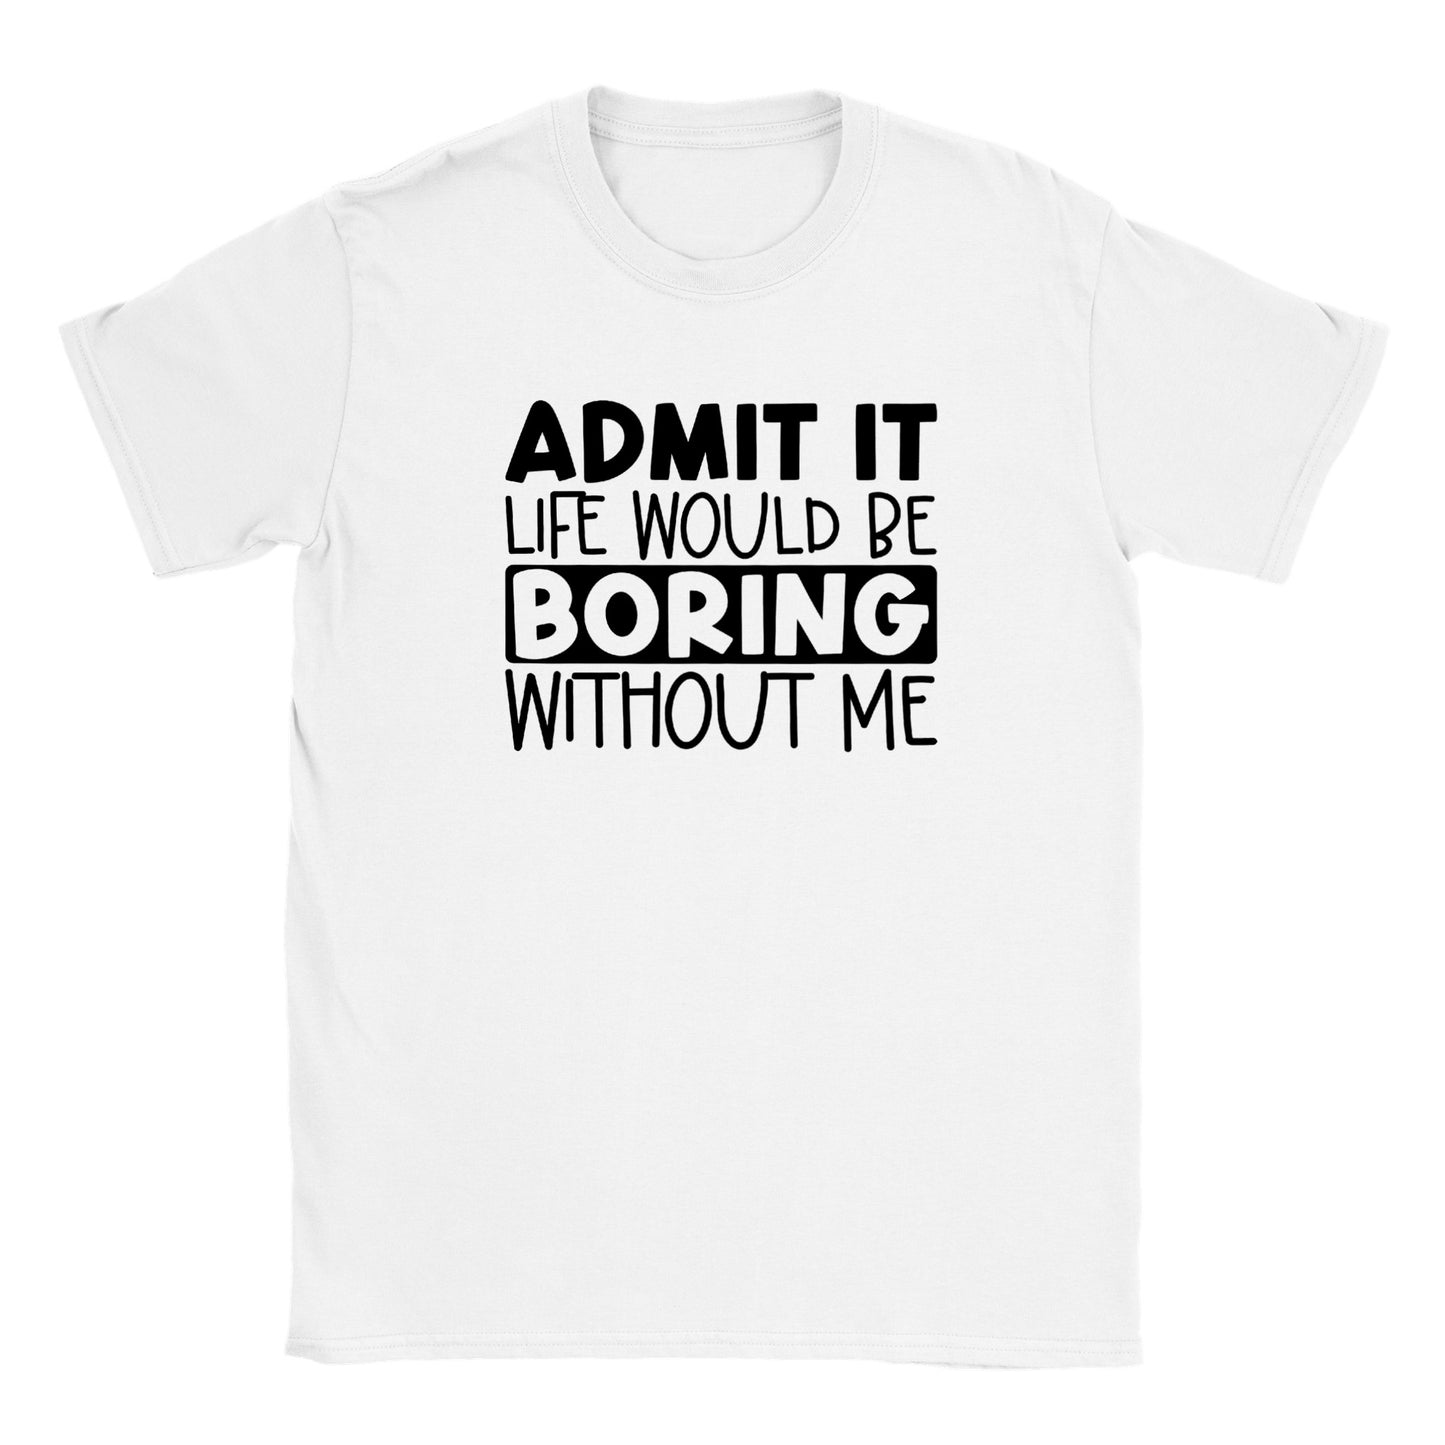 Admit It Life Would Be Boring Without Me - Classic Unisex Crewneck T-shirt - Mister Snarky's